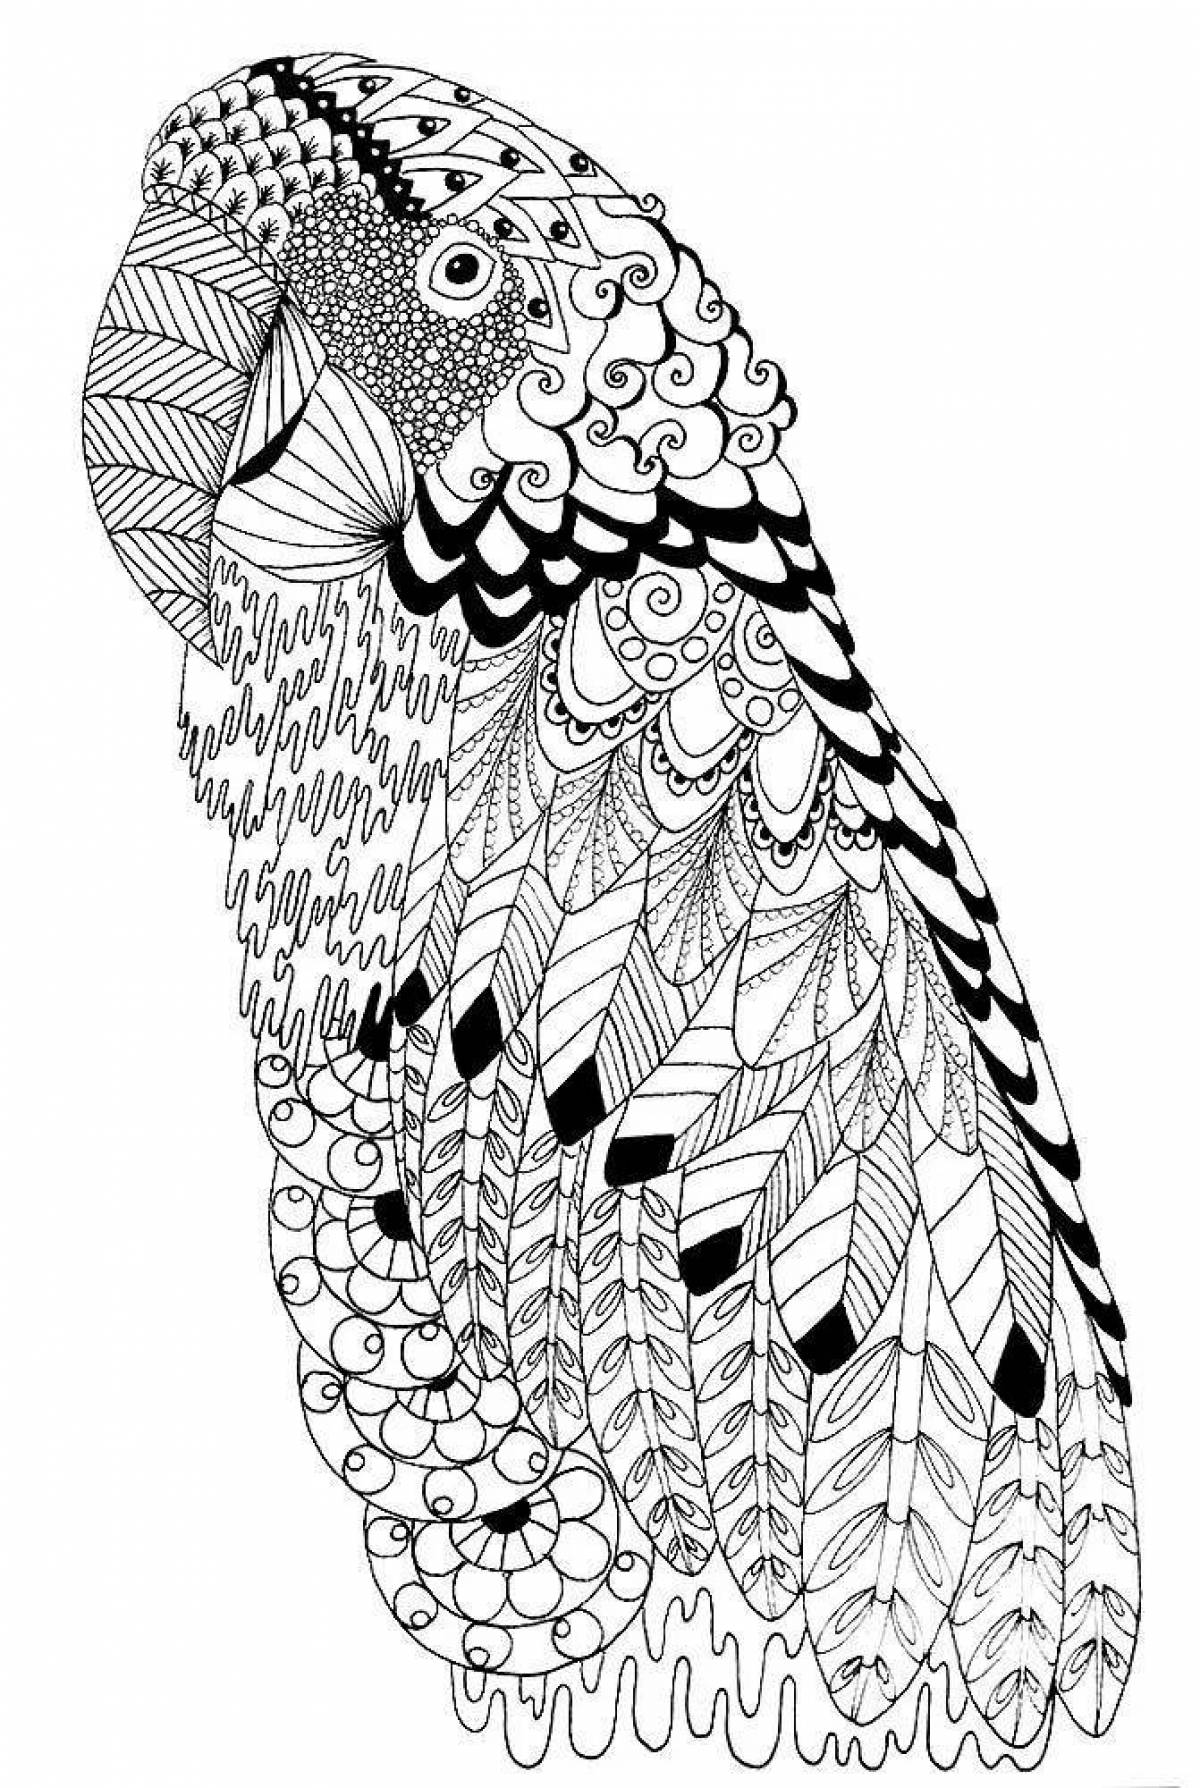 Coloring sheet for intricate gel pen